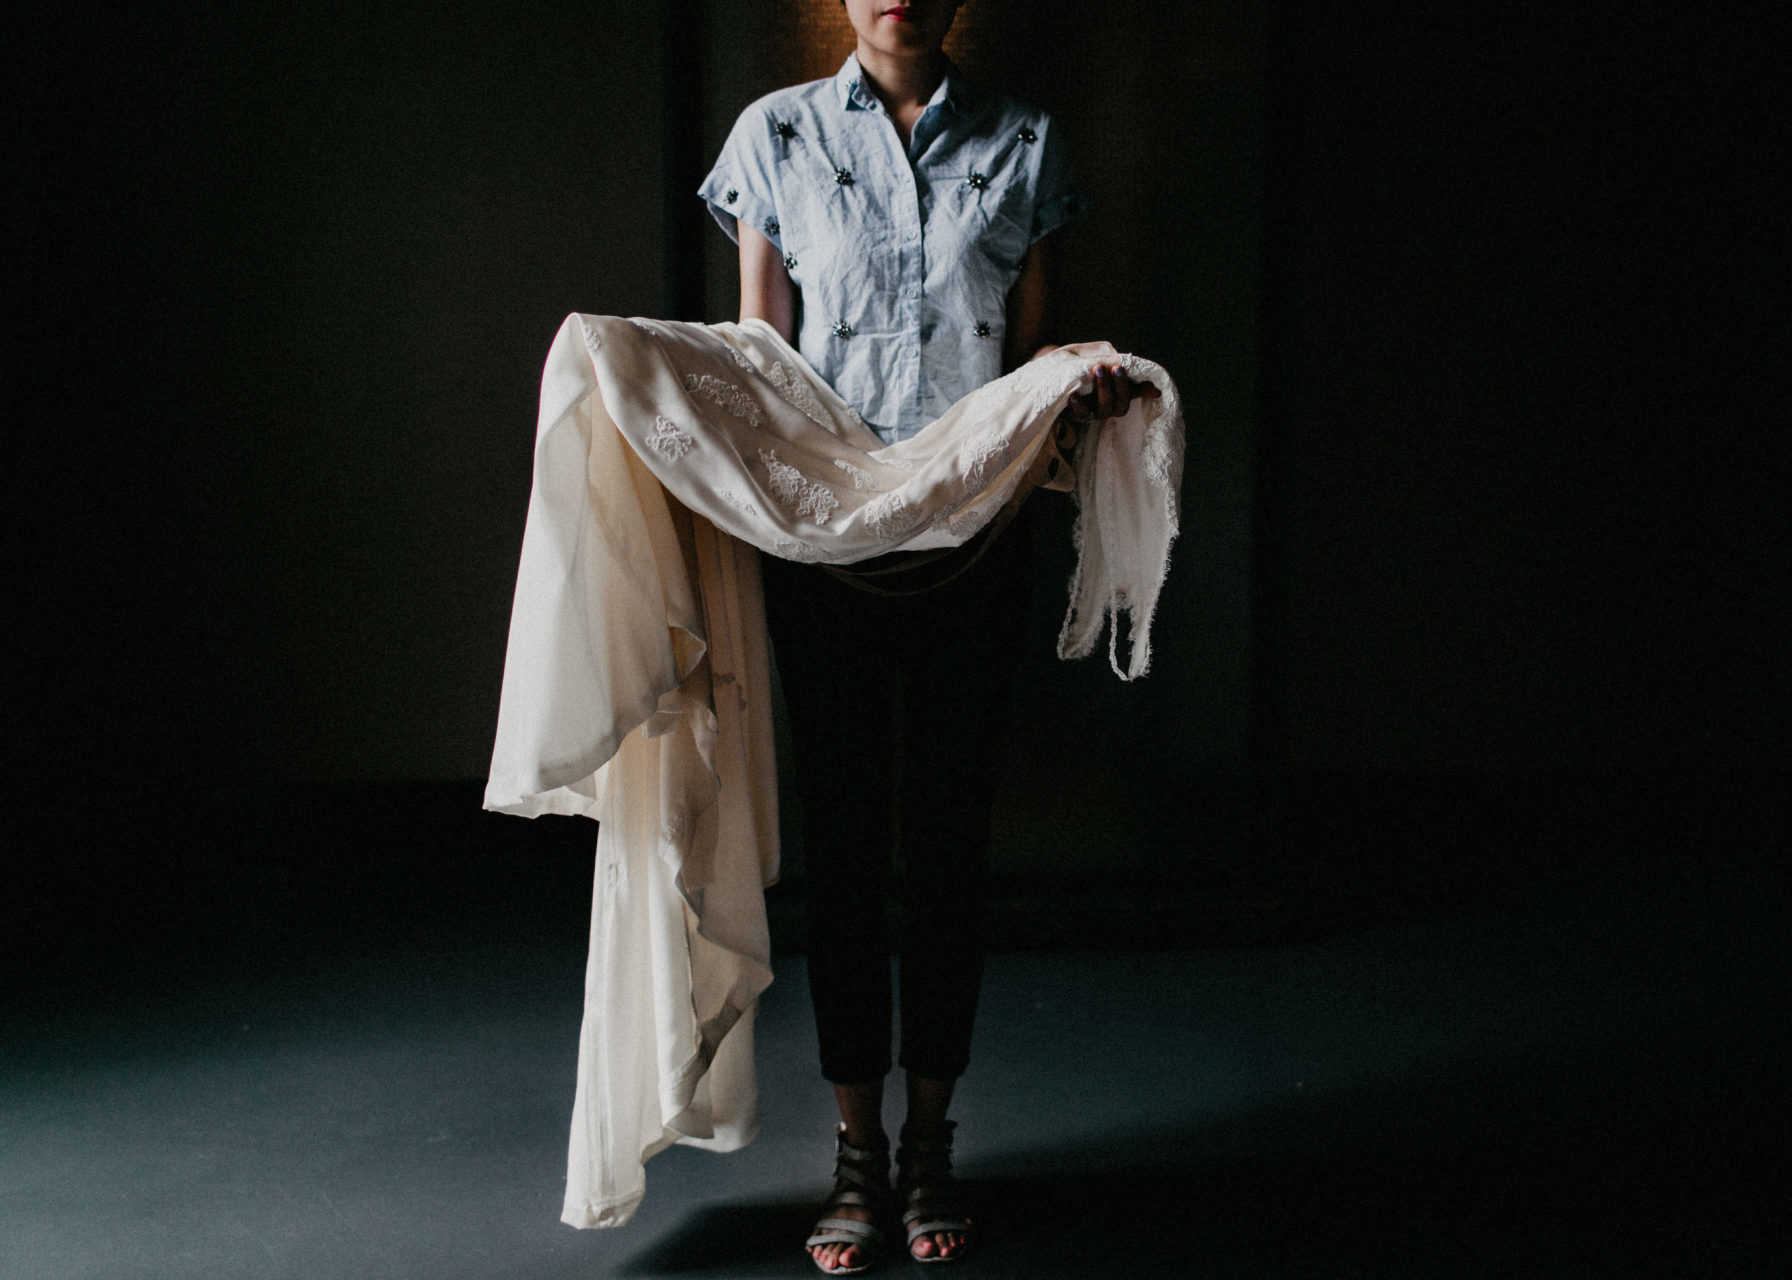 A woman in an embellished short-sleeved chambray top holds a wedding dress draped over her arms in a dark, shadowy space in a photo by Shaw Photography Co.